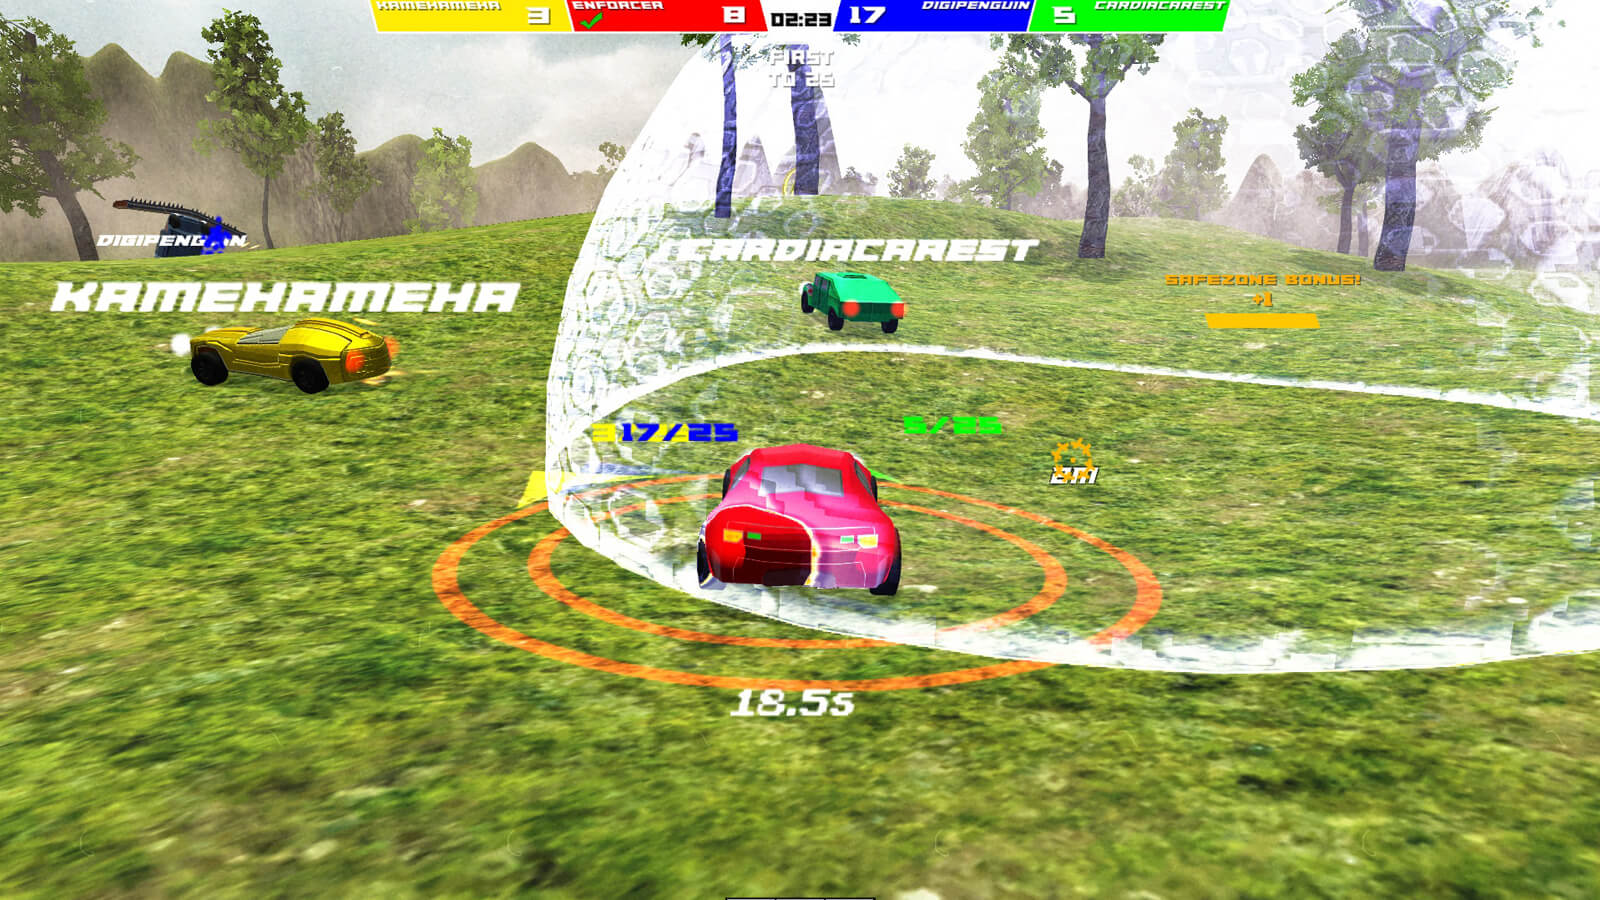 A red car enters a translucent bubble dome as yellow and green cars speed away